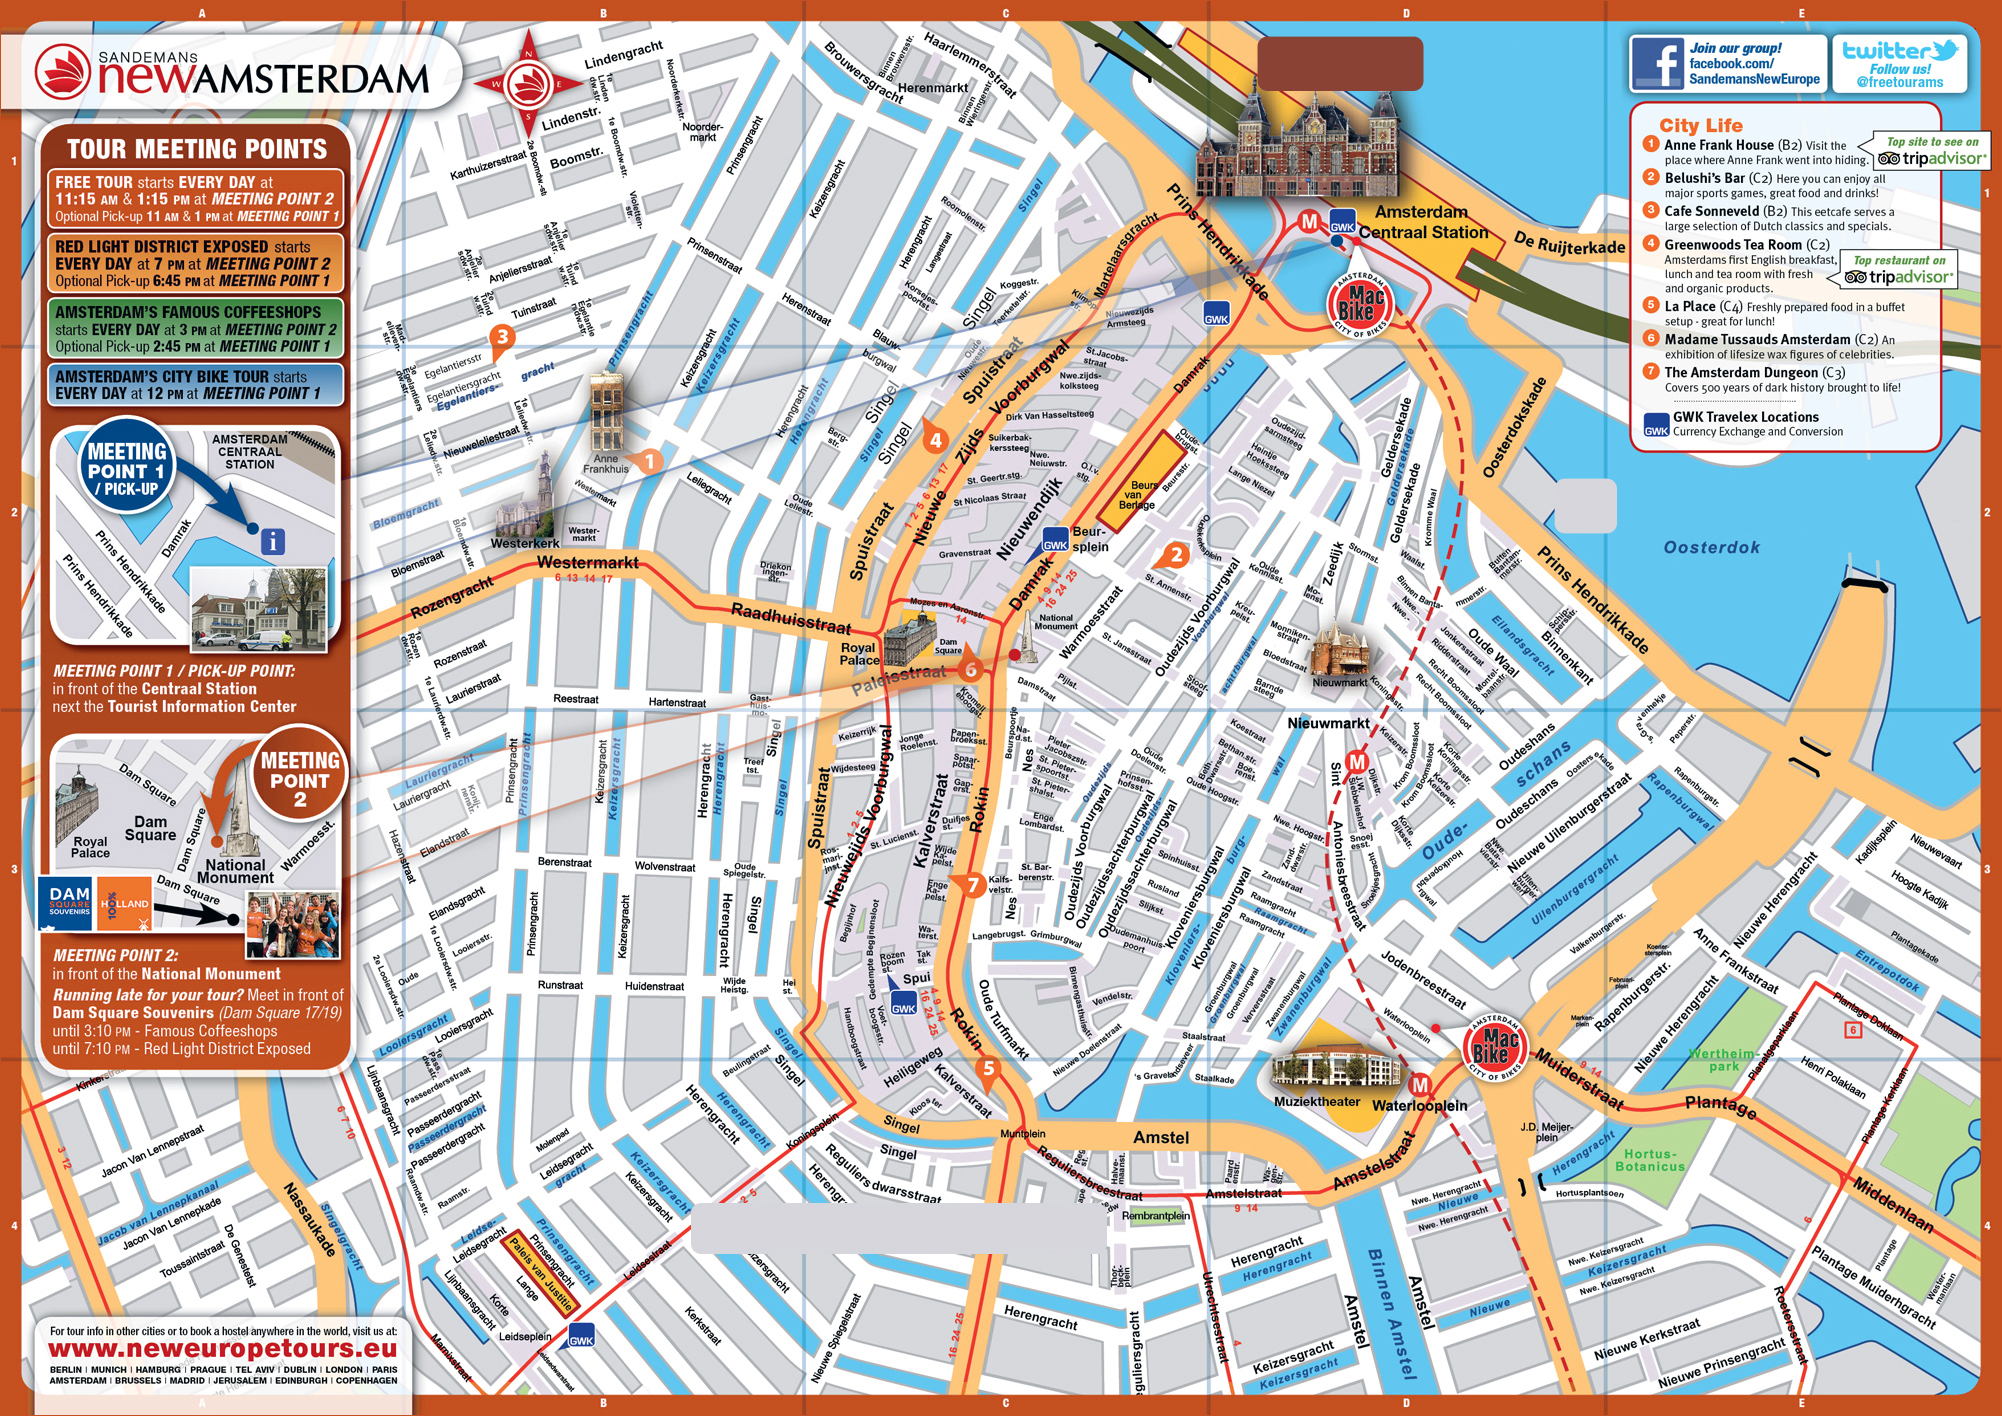 Large top tourist attractions map of central part of Amsterdam city | Vidiani.com | of all countries in one place